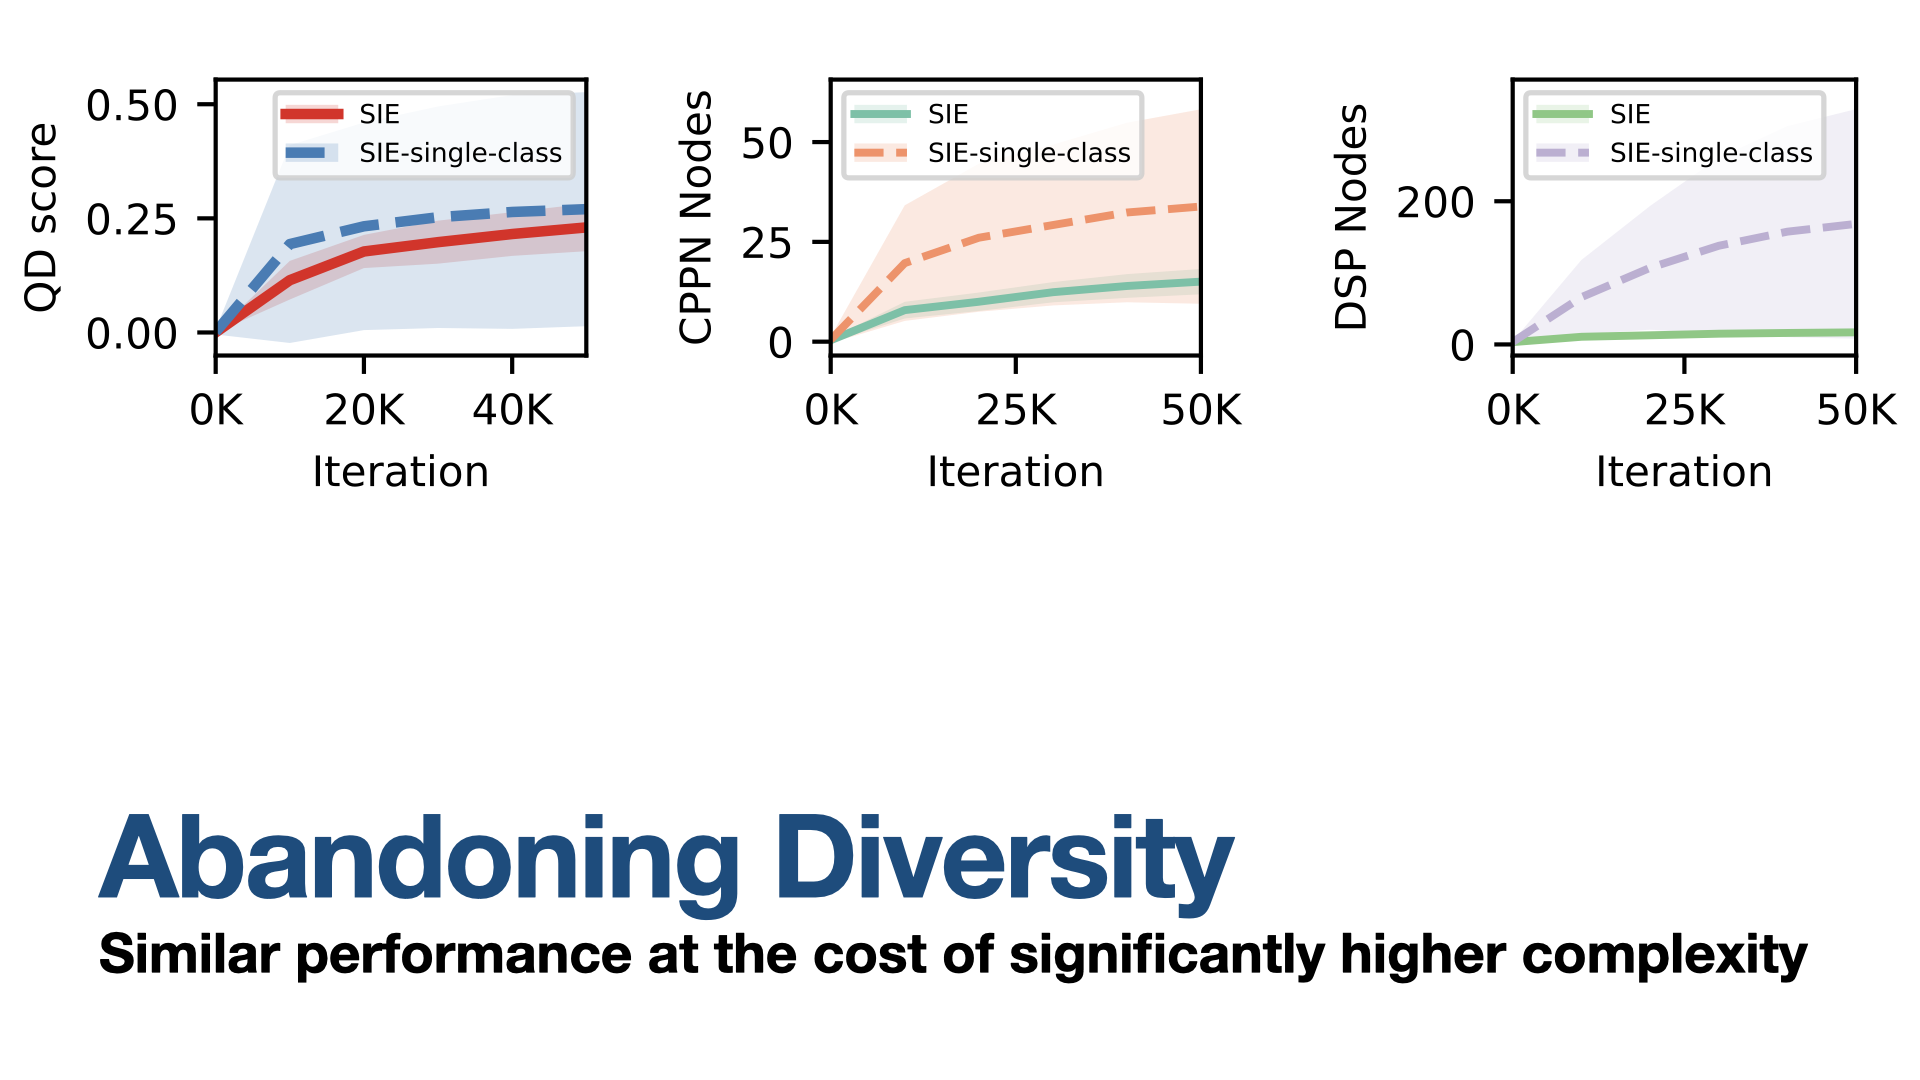 Abandoning Diversity: Similar performance at the cost of significantly higher complexity